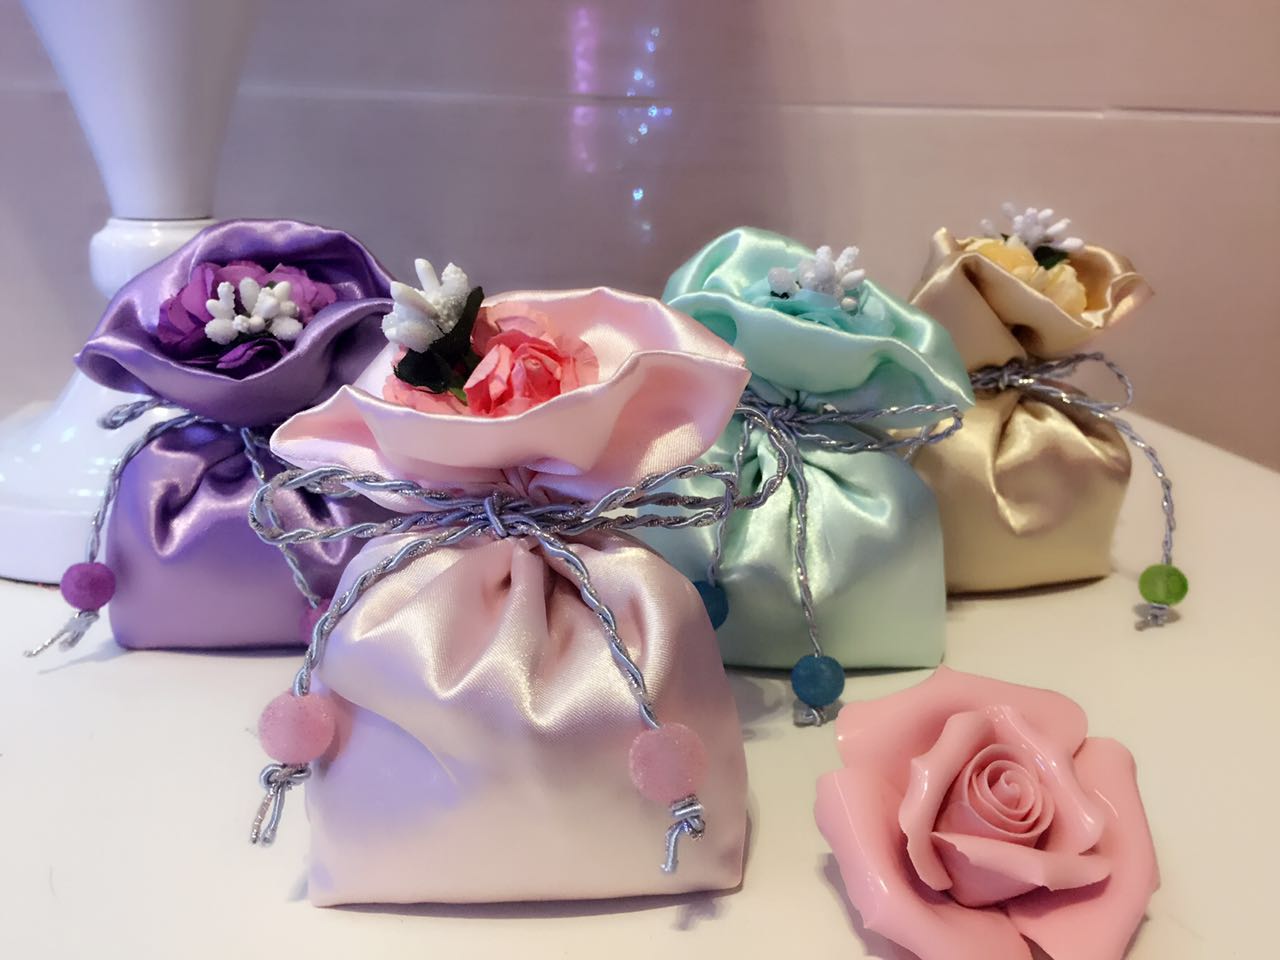 A family of aromatherapy manufacturers selling satin bow aromatherapy aromatherapy Fragrance Sachet bag bag: hyacinth violet Paris spring sky Caixia welcomed the crowd7